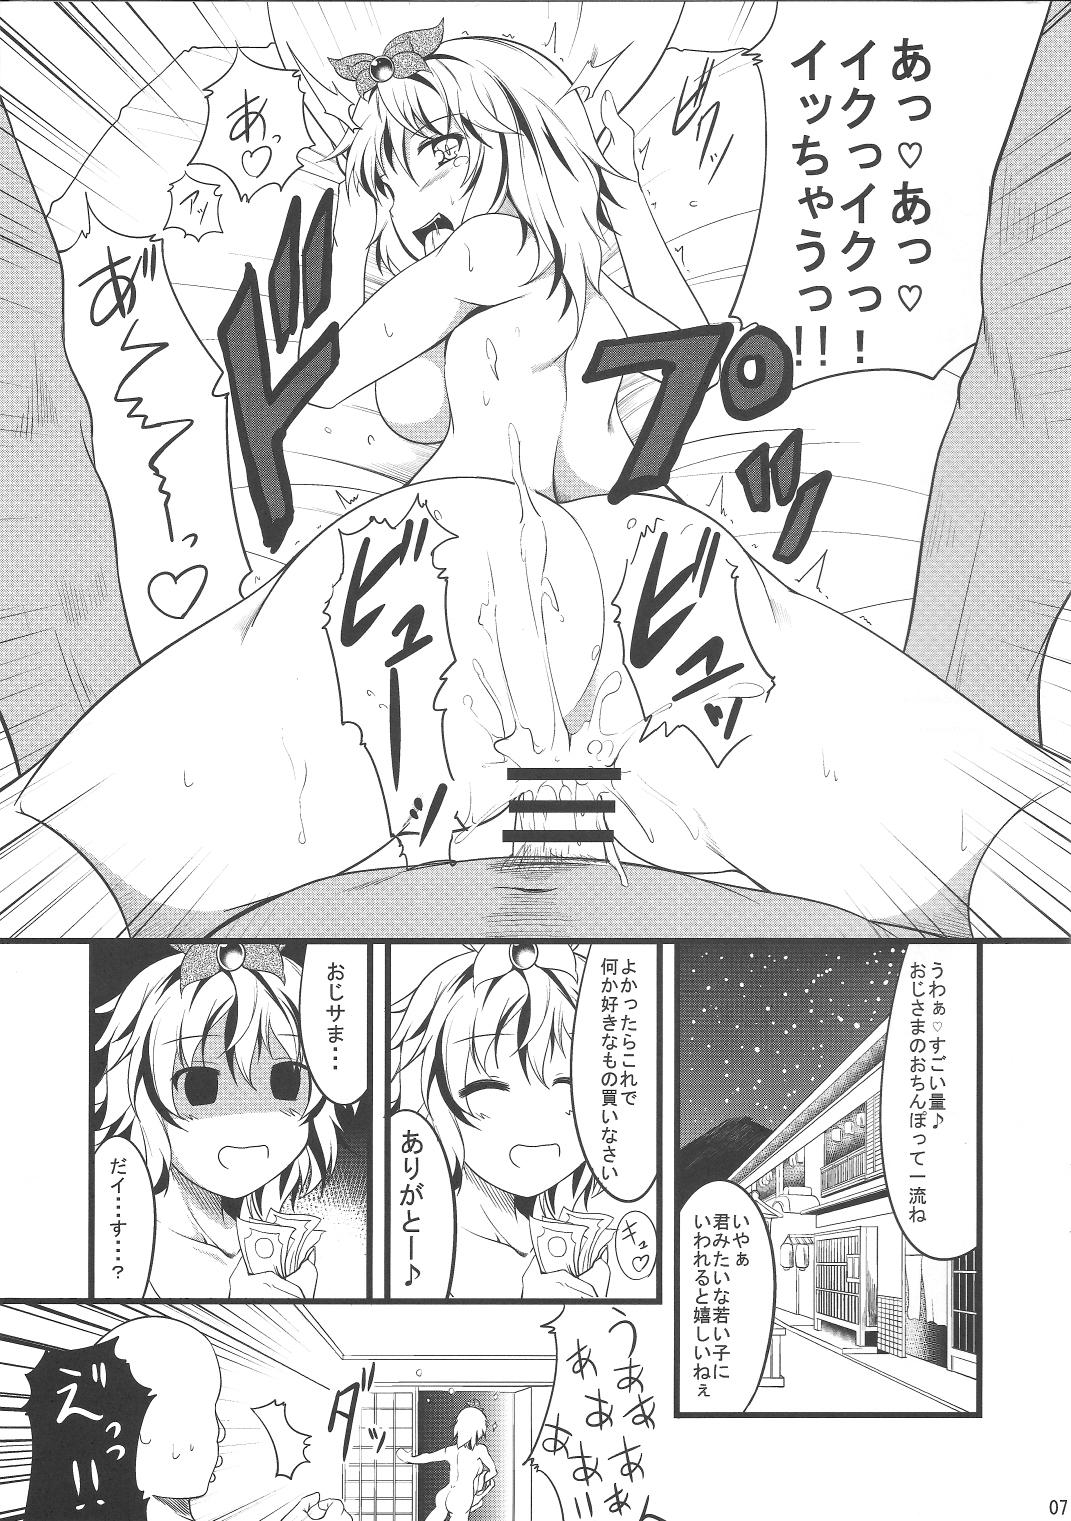 Thai Jouyoku no Tora - Tiger of passion - Touhou project Italiano - Page 6